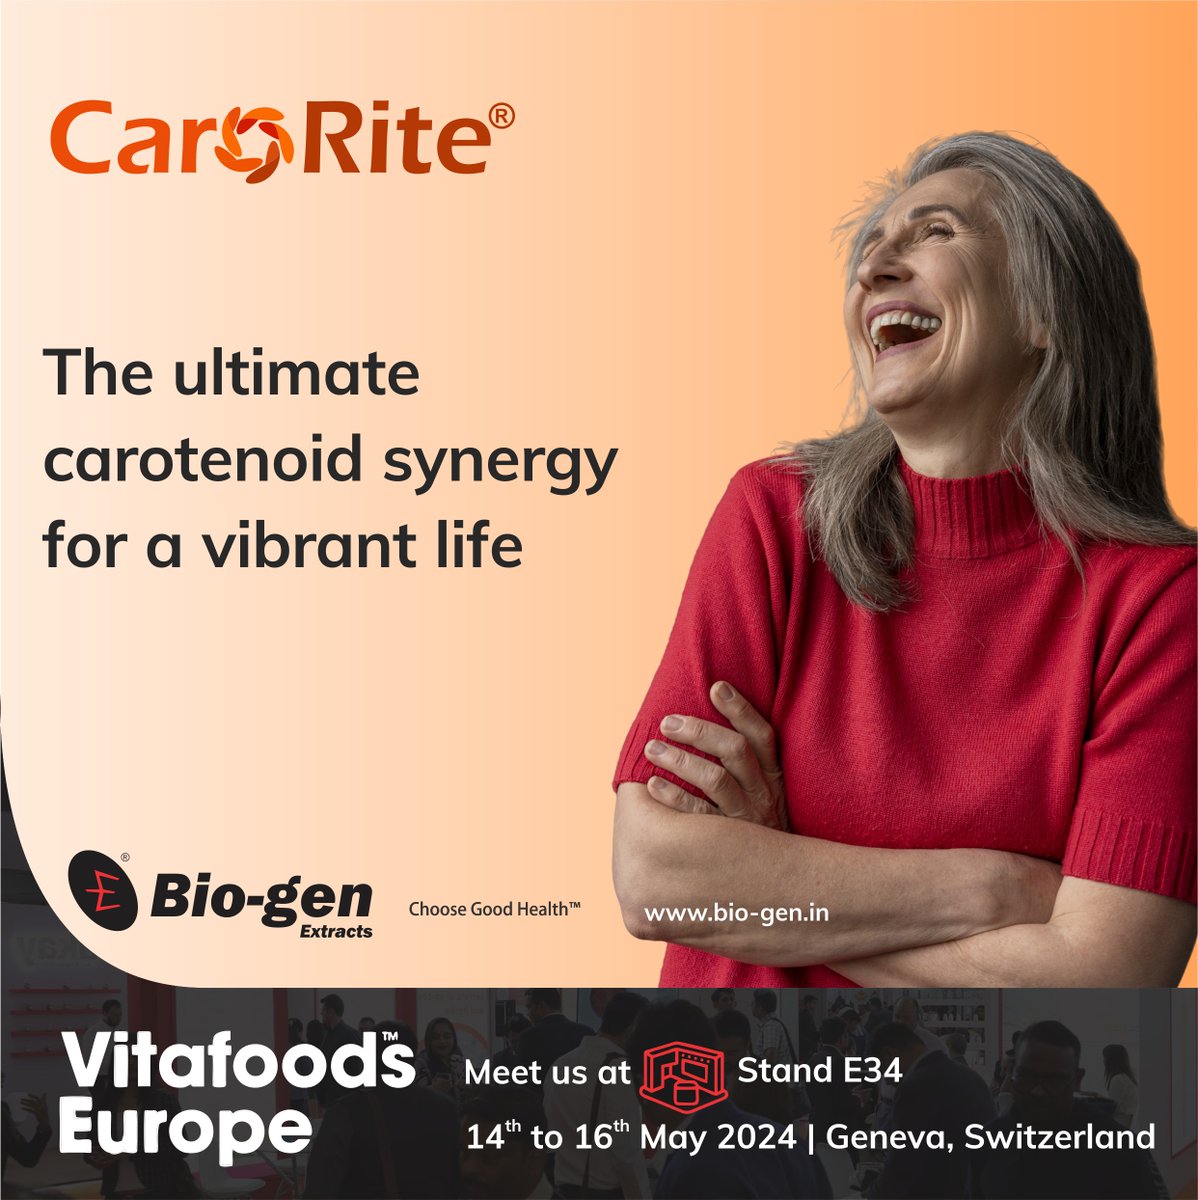 Discover CaroRite® , the ultimate carotenoid synergy for improving quality of life

Visit us at Stand E34 from 14th to 16th May at Vitafoods Europe 2024, to help your consumers Choose Good Health™.

Write to sales@bio-gen.in for an appointment!

#carotenoids #vitafoodseurope